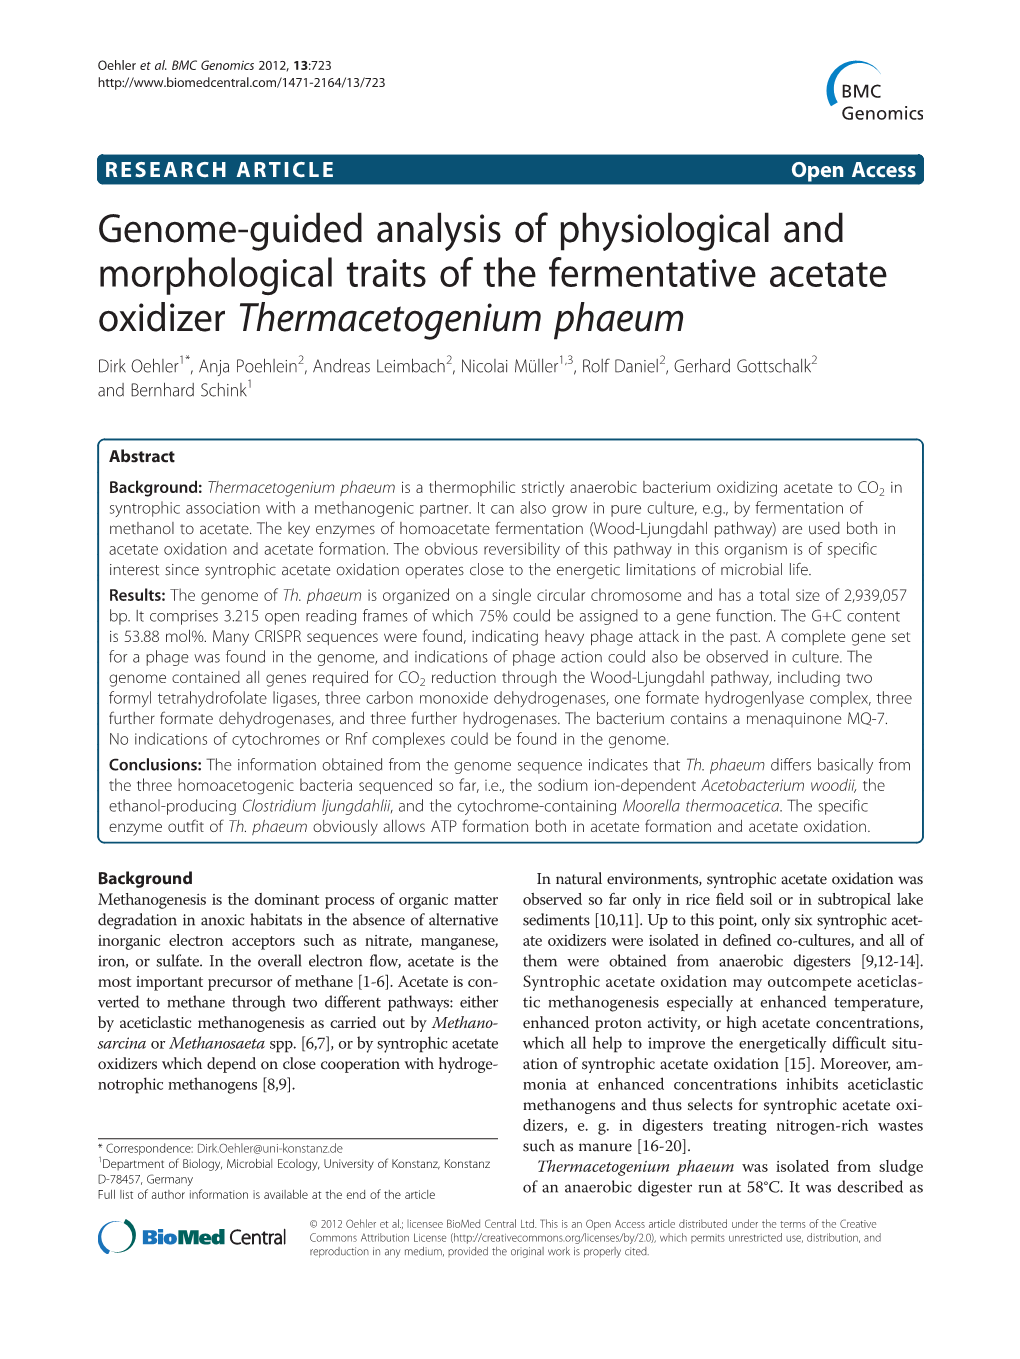 Genome-Guided Analysis of Physiological and Morphological